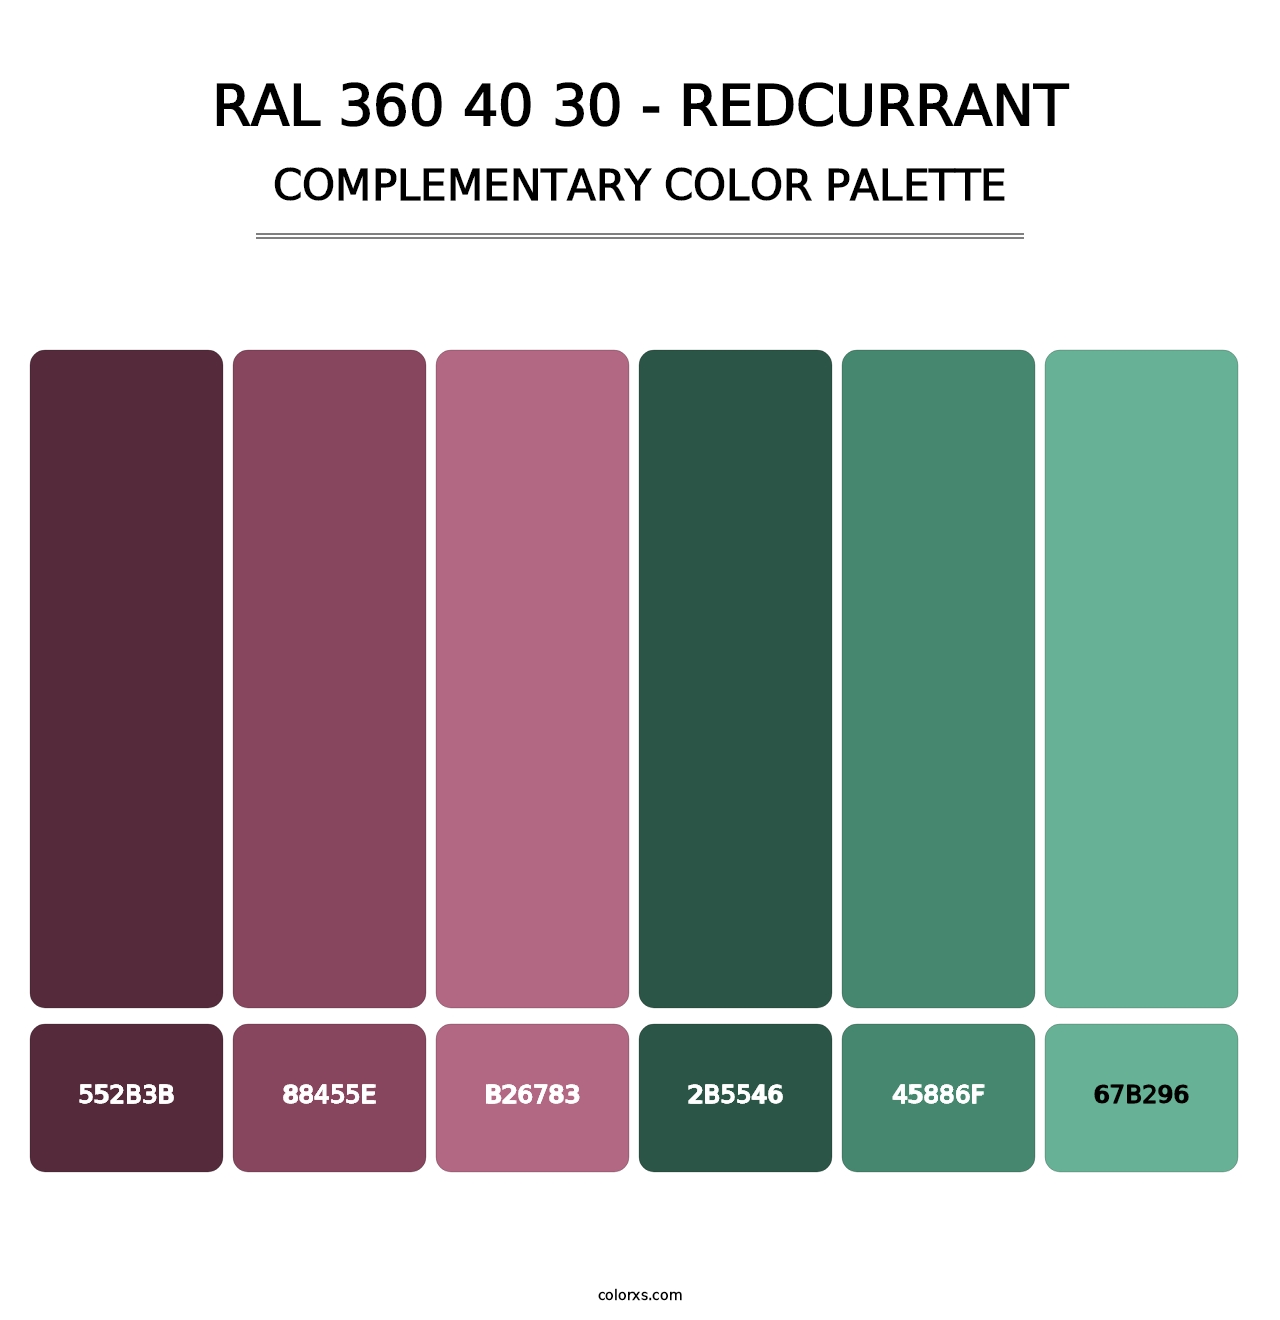 RAL 360 40 30 - Redcurrant - Complementary Color Palette